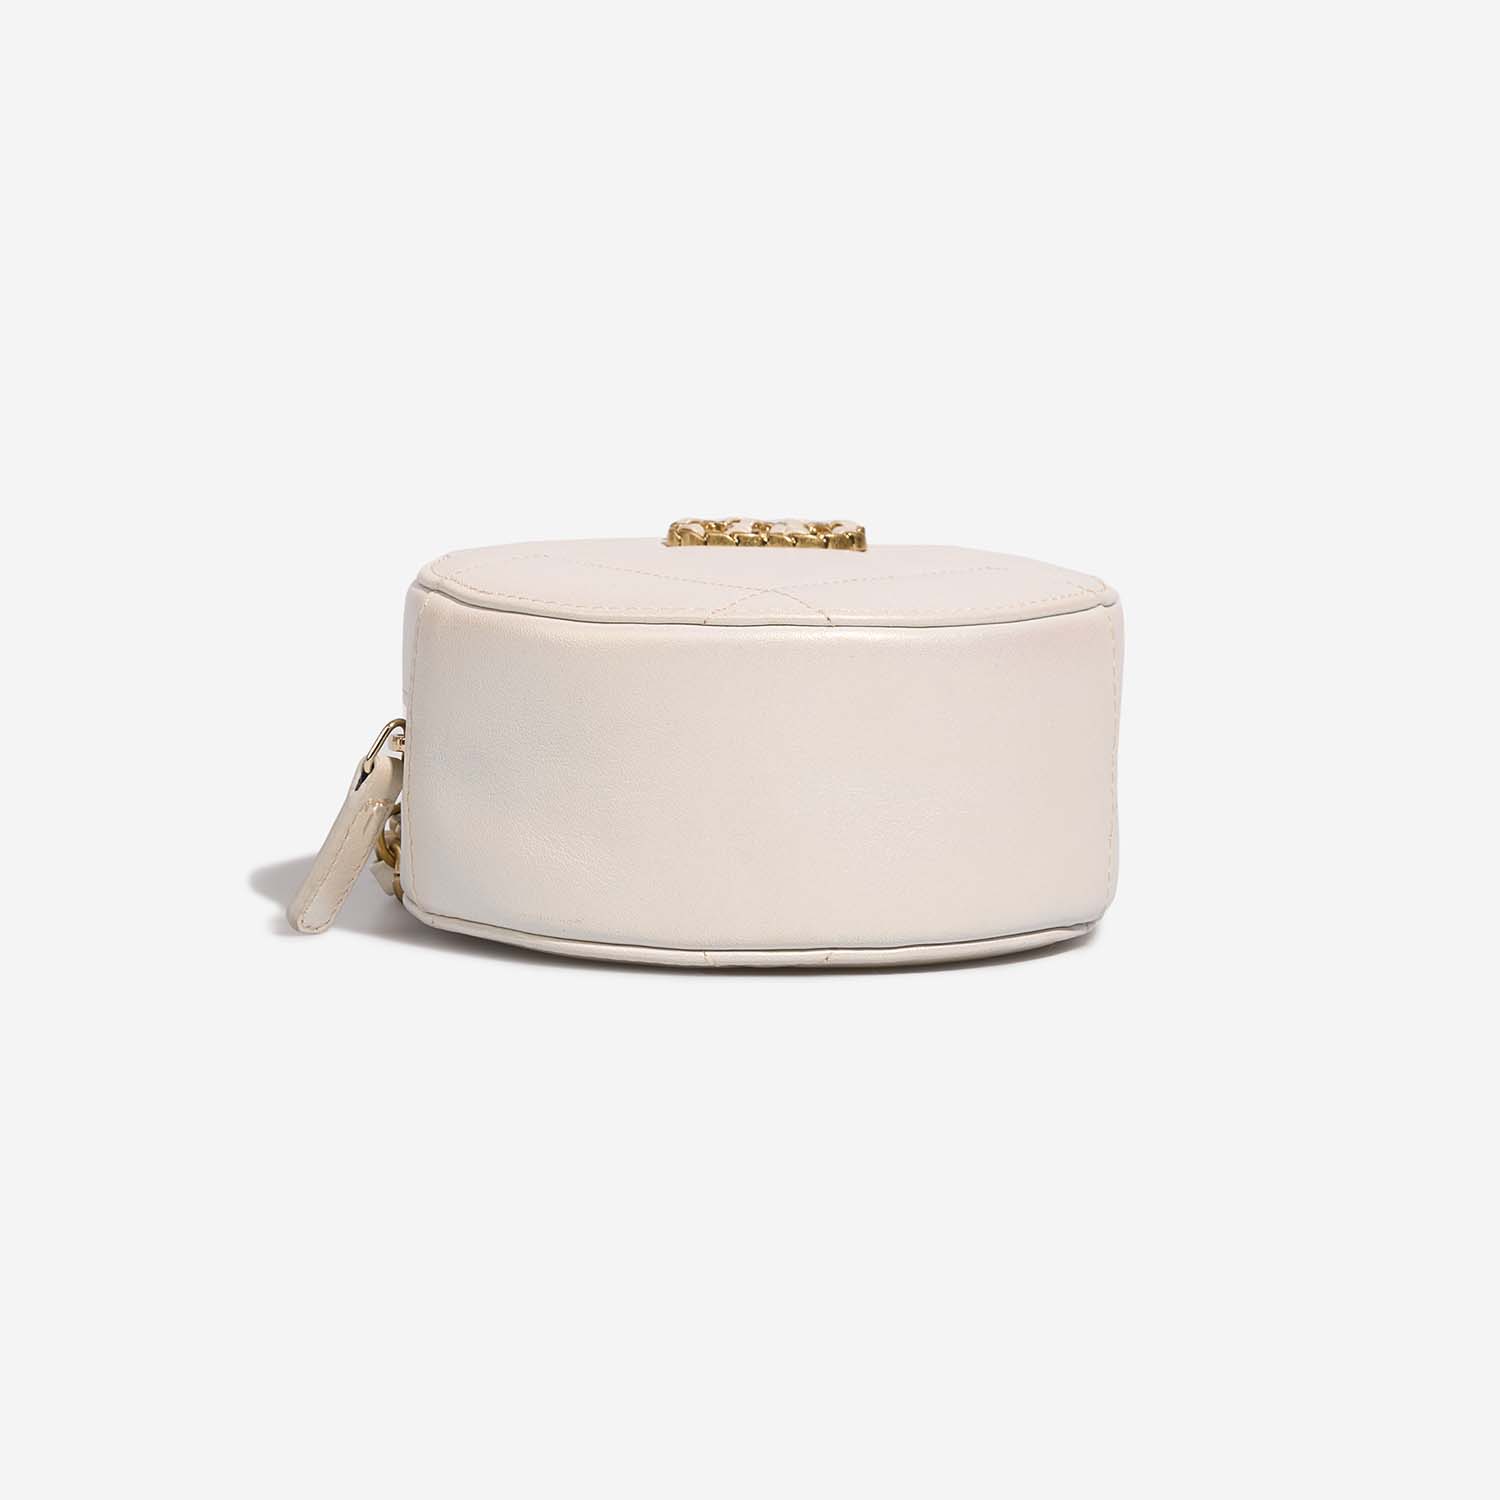 Chanel 19 RoundClutch PearlWhite Bottom  | Sell your designer bag on Saclab.com